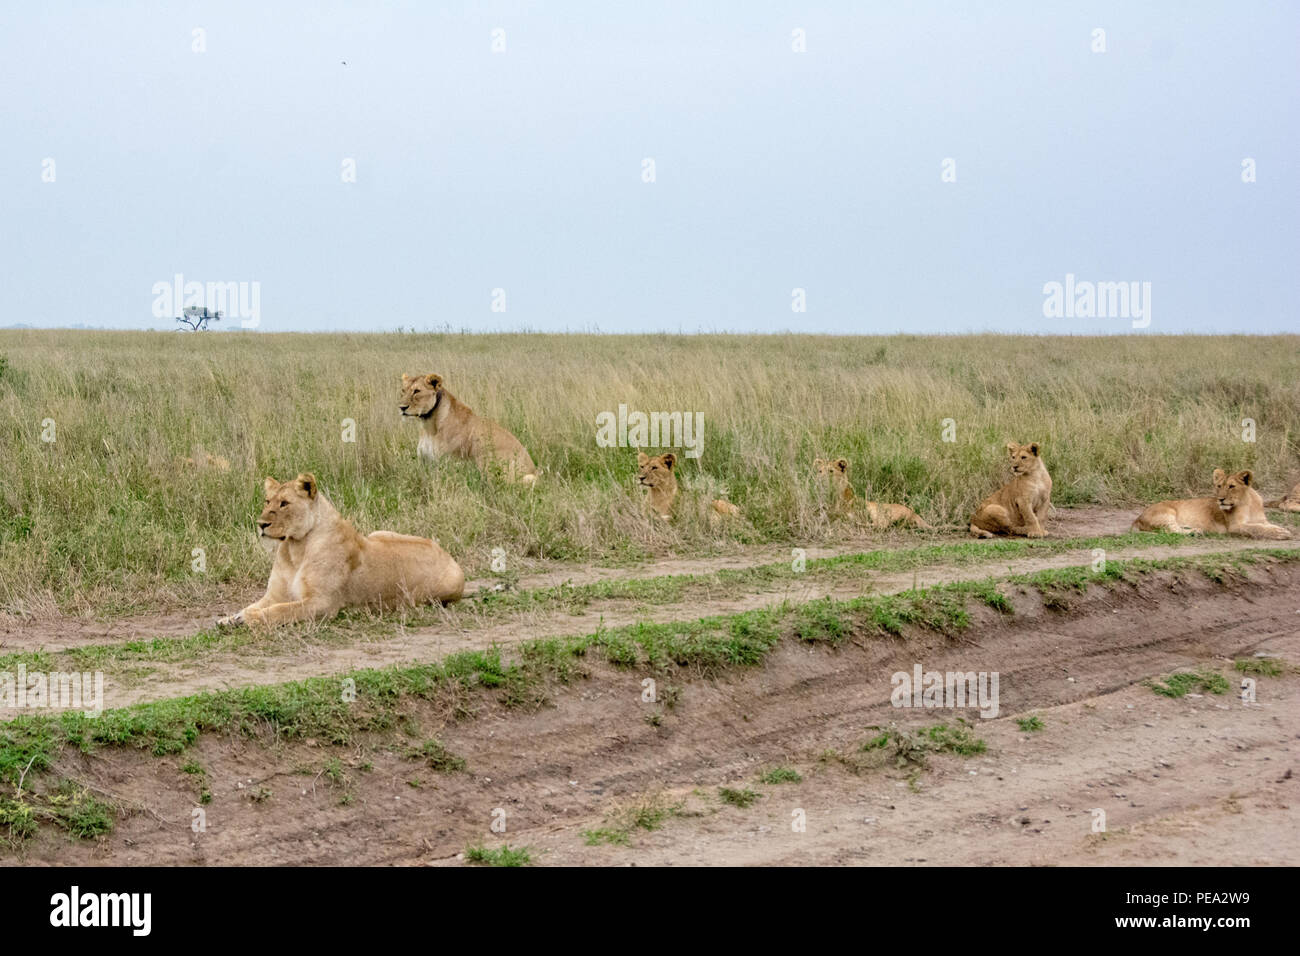 A prey of lions looking towards a distraction in Serengeti NP, Tanzania Stock Photo